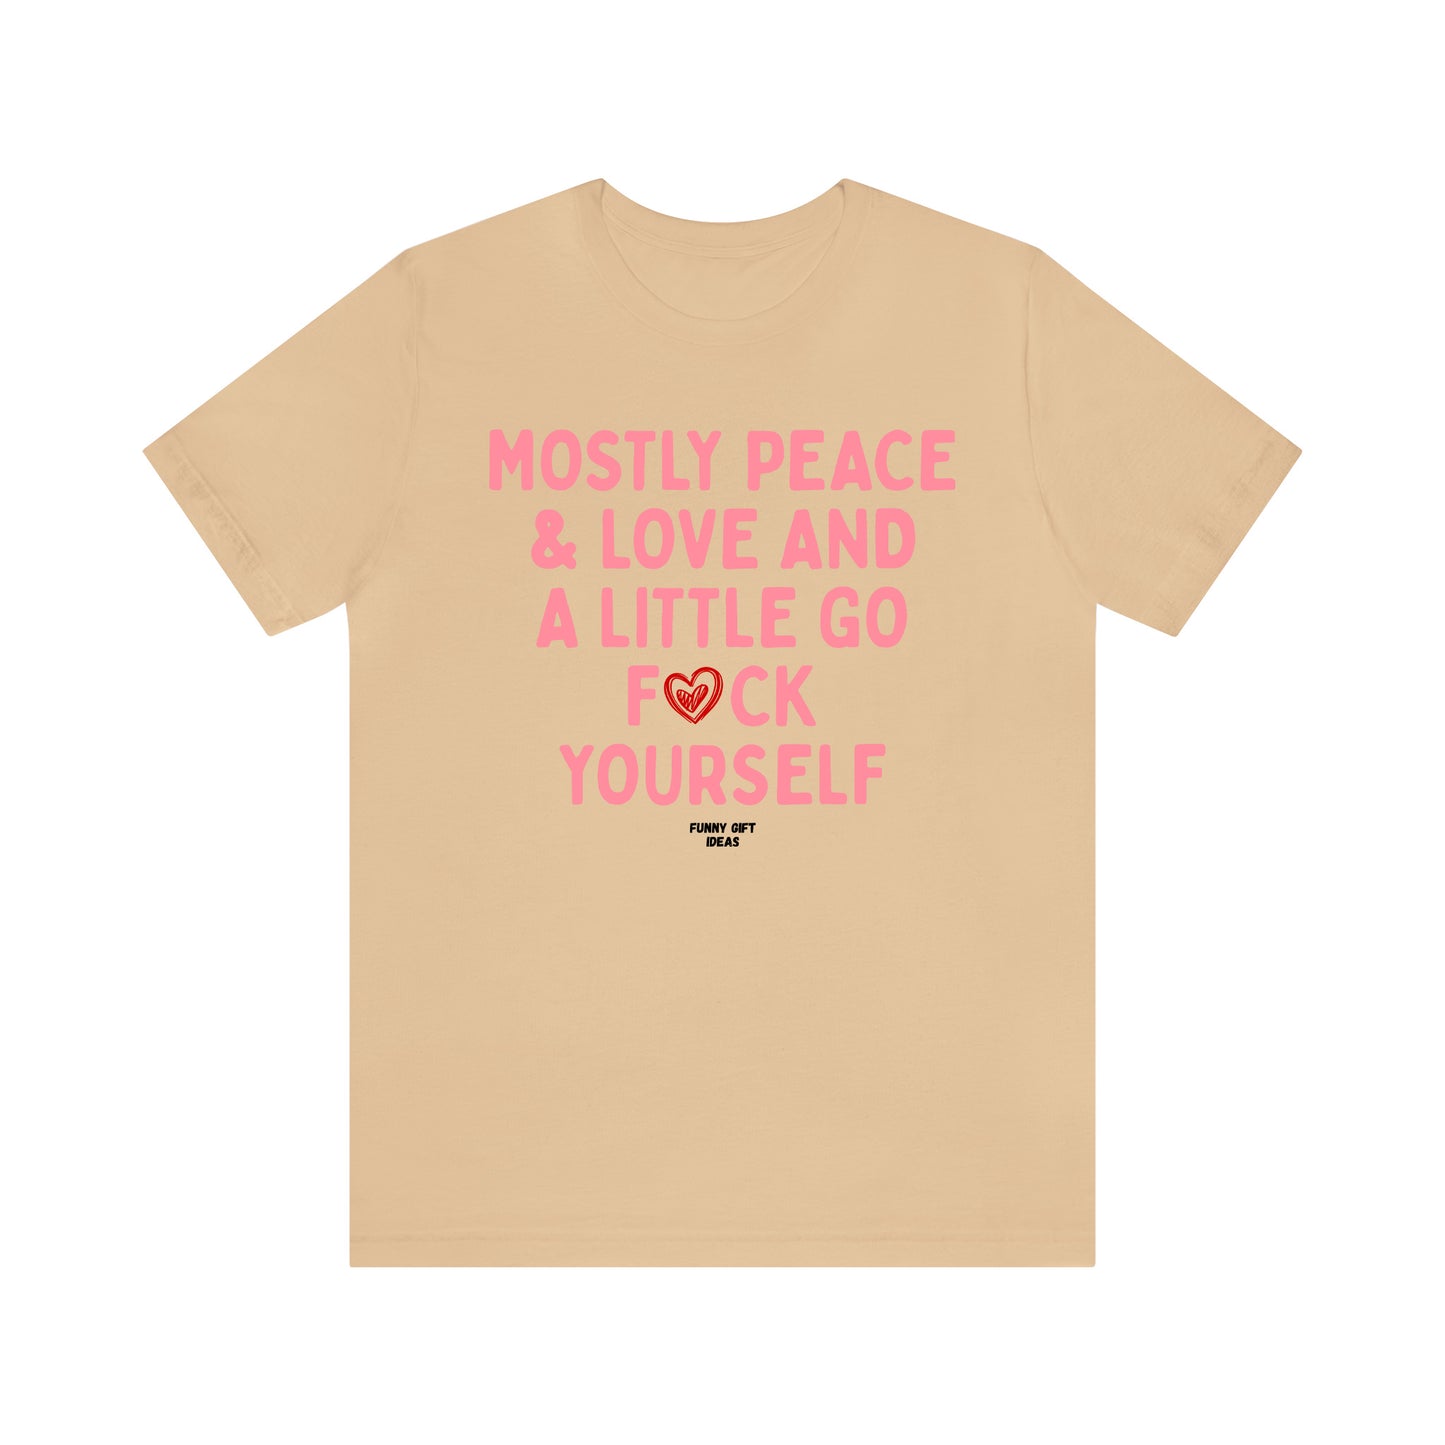 Funny Shirts for Women - Mostly Peace & Love and a Little Go Fuck Yourself - Women's T Shirts